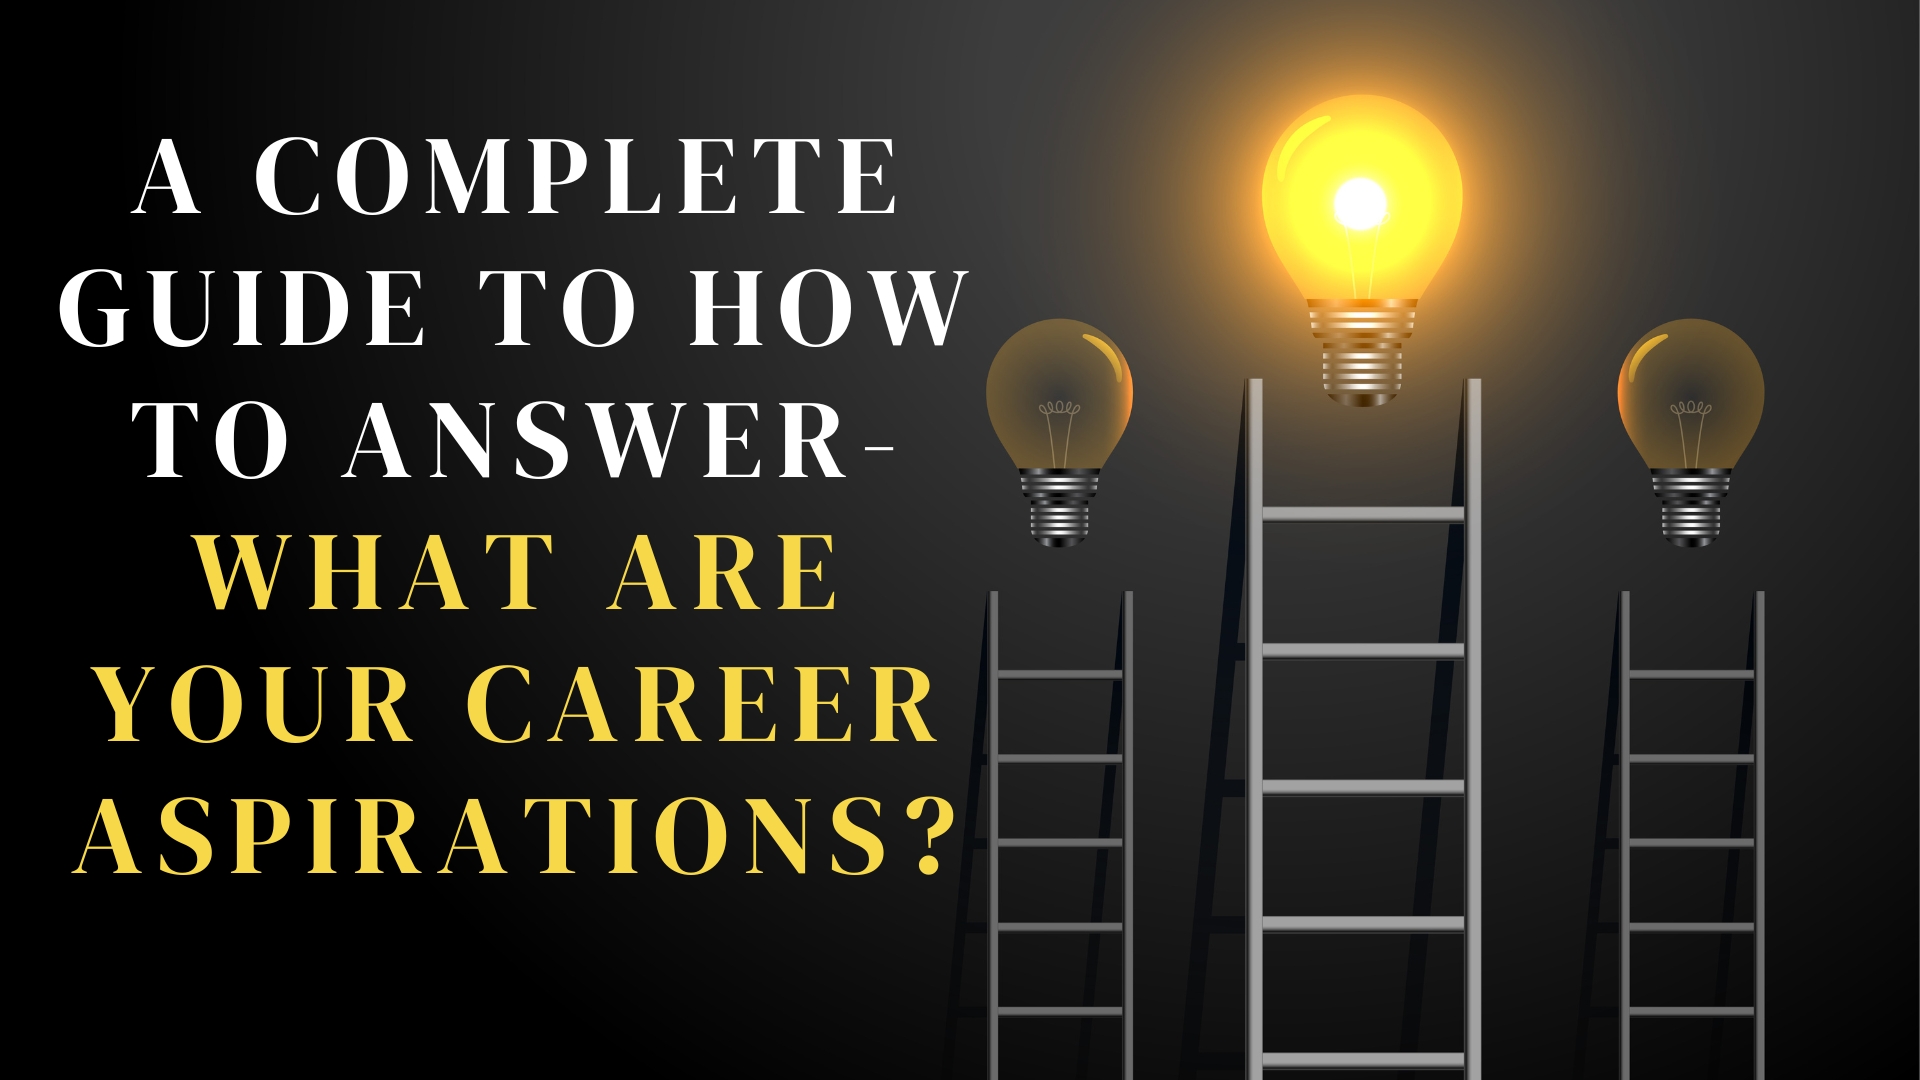 A Complete Guide To How To Answer- What Are Your Career Aspirations